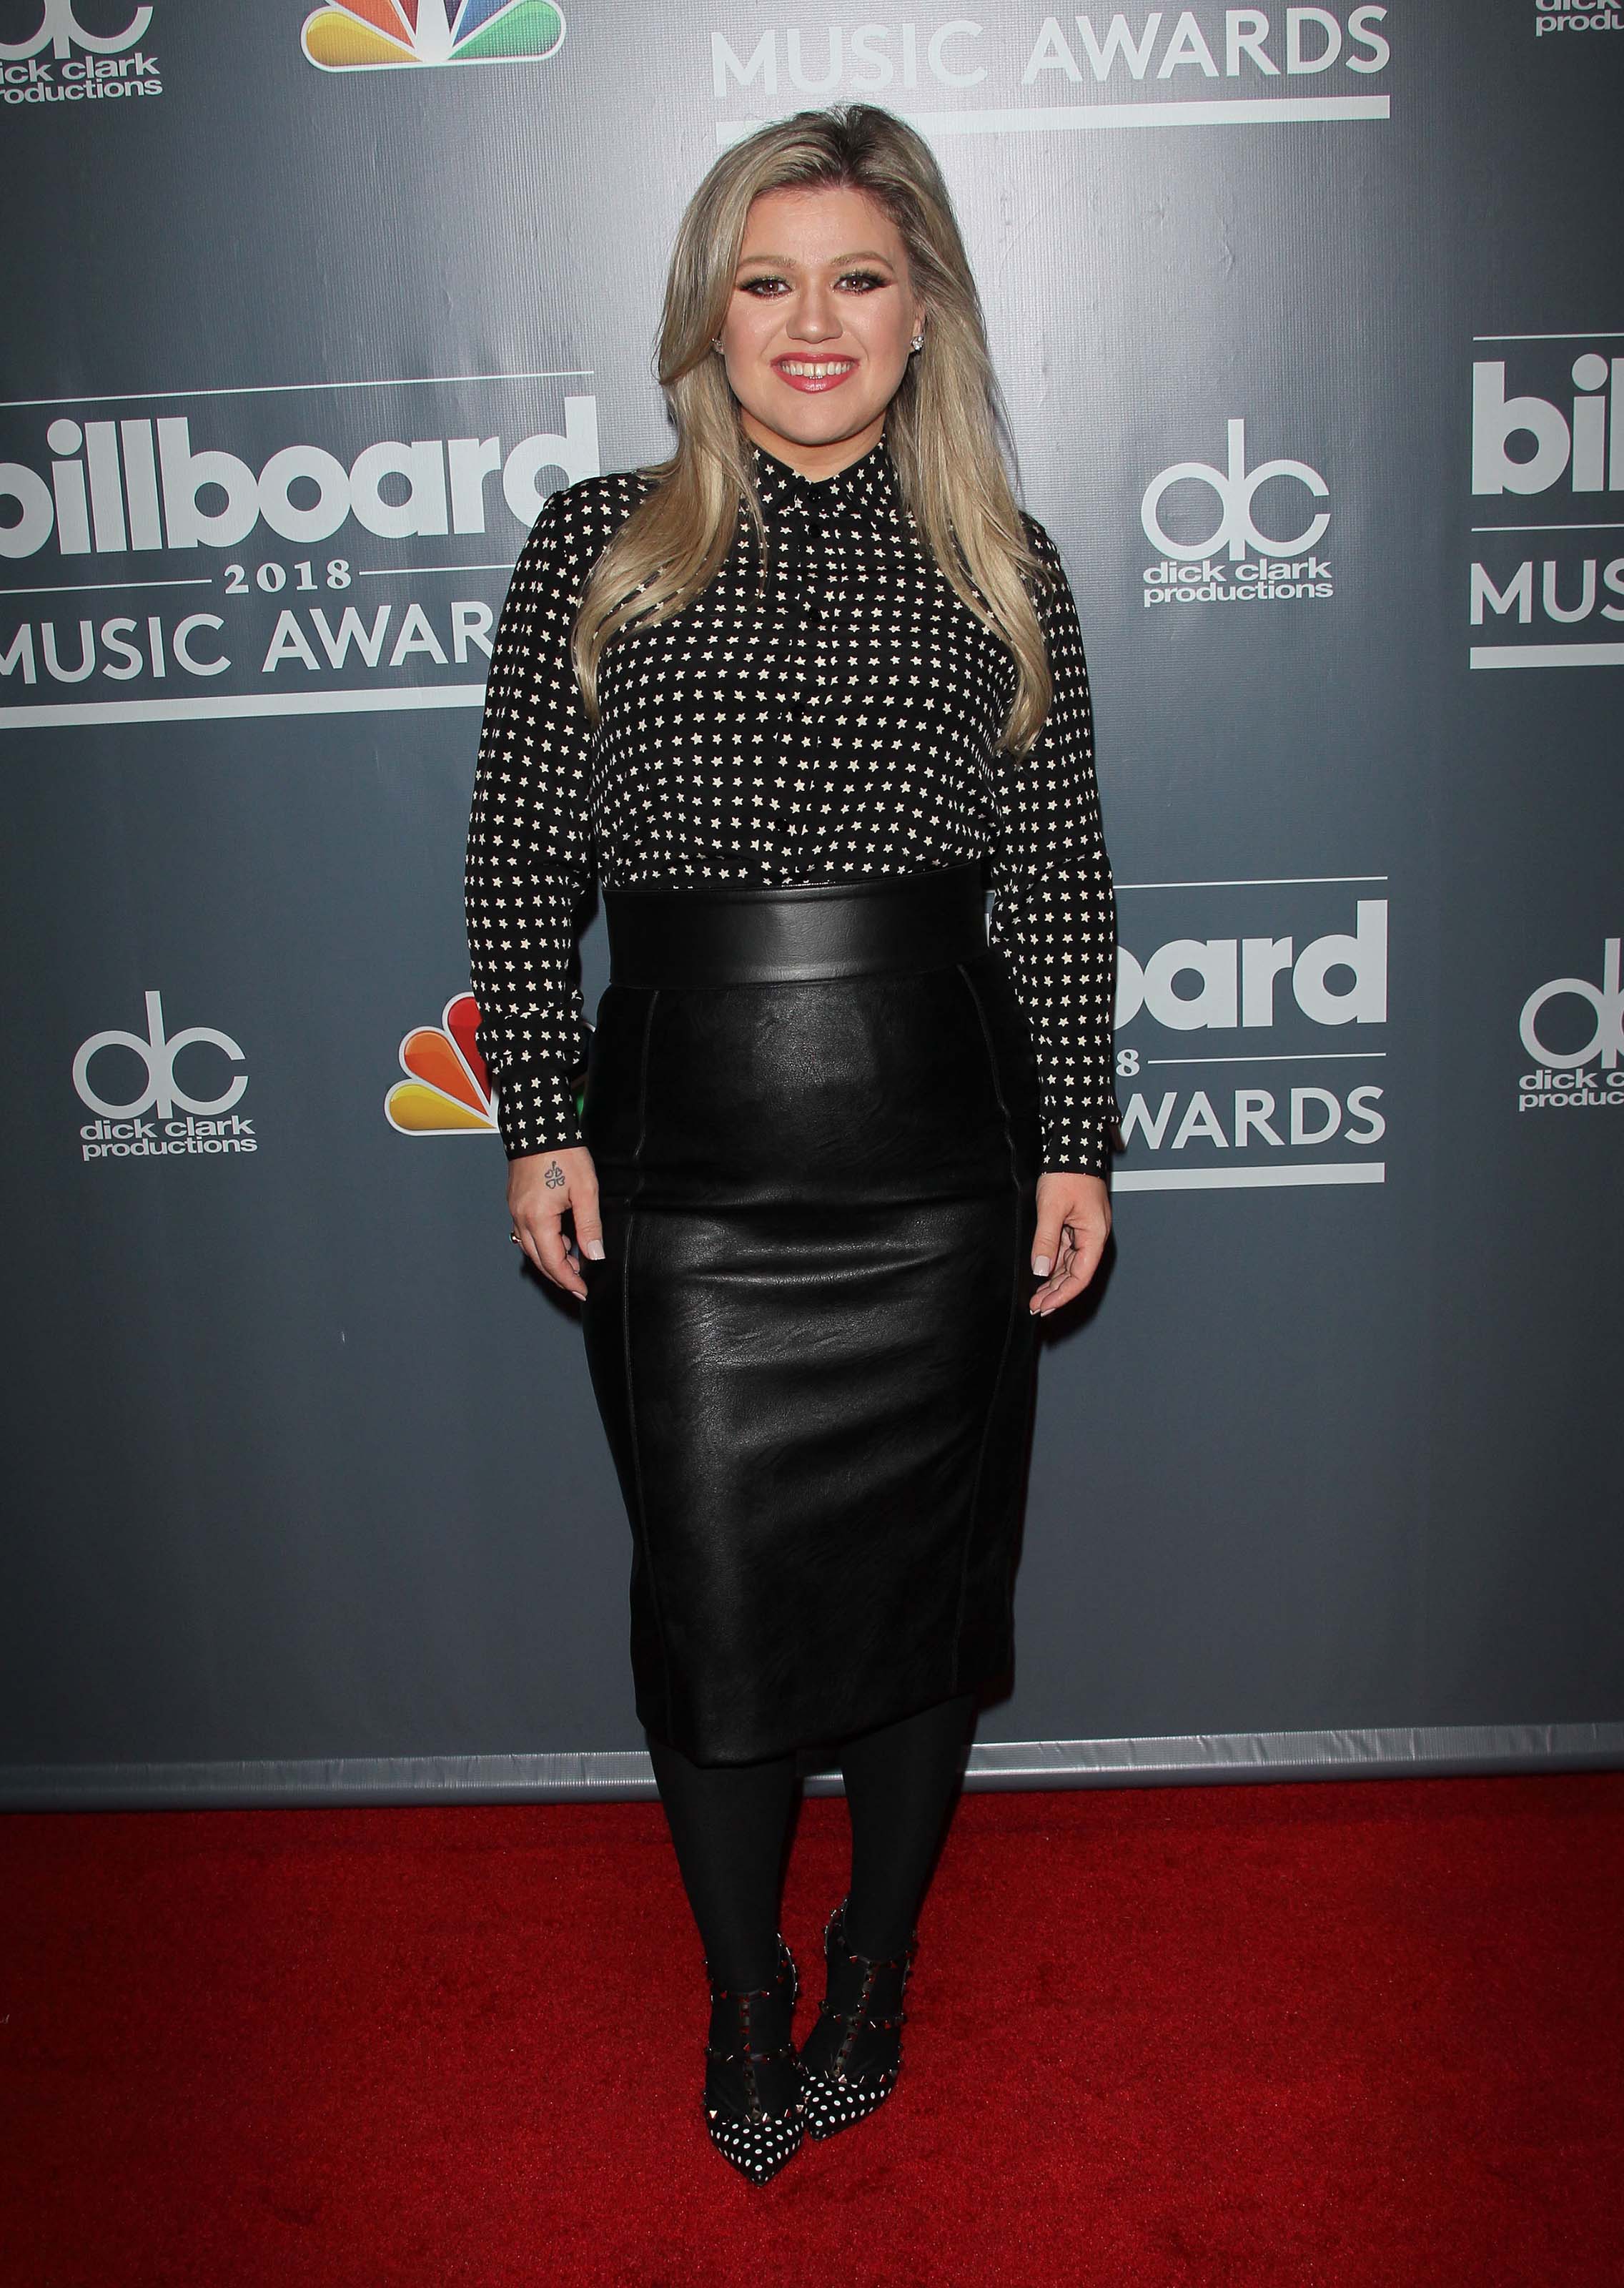 Kelly Clarkson attends 2018 Billboard Music Awards Photo Call